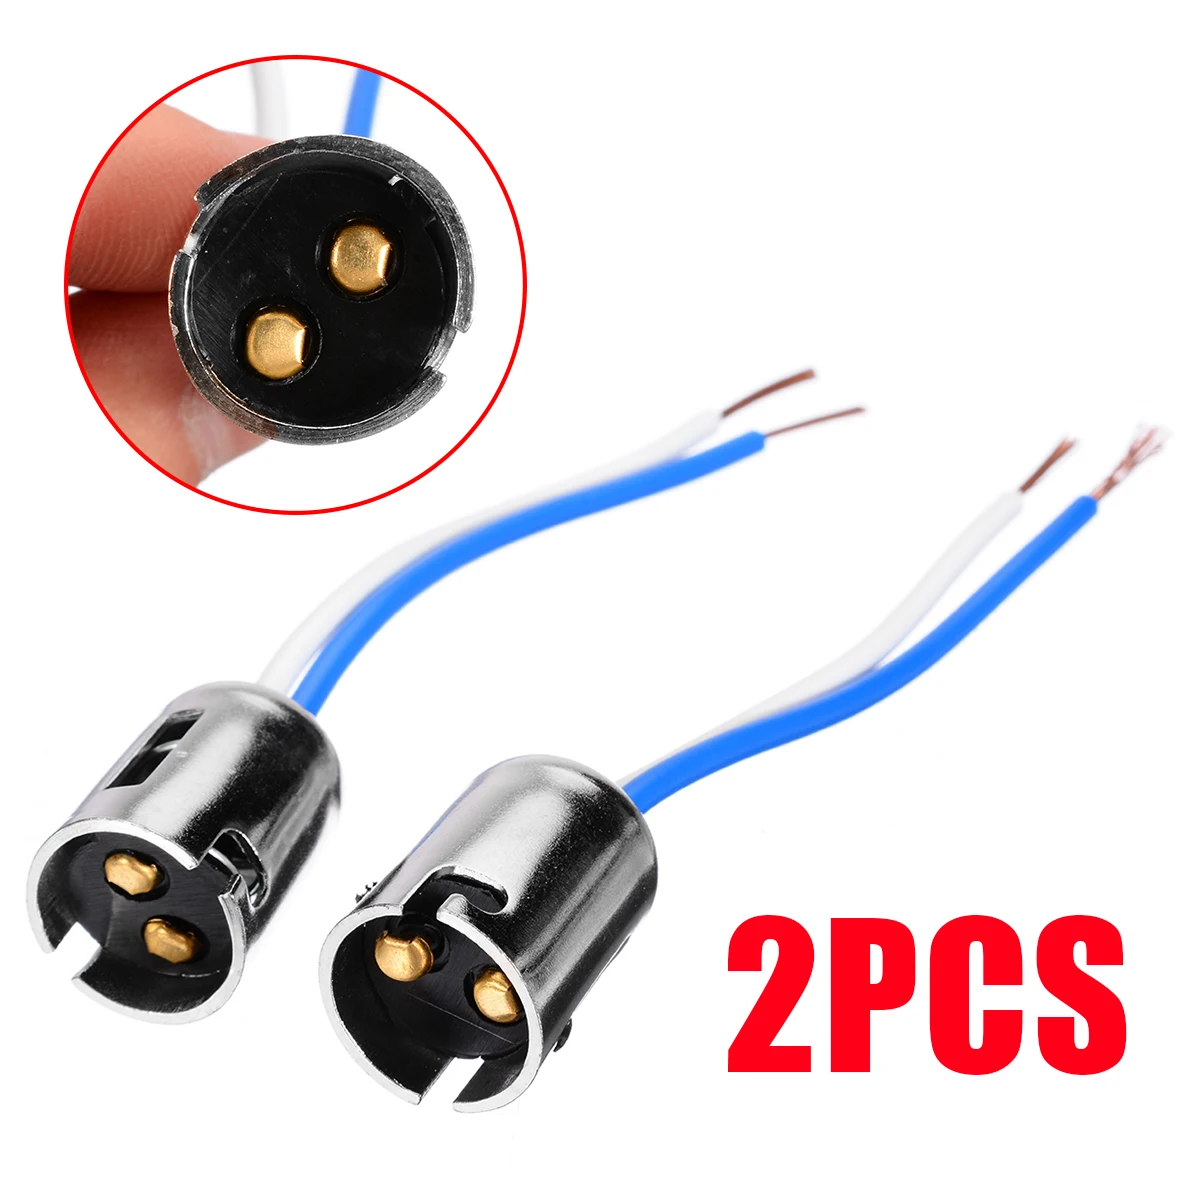 2x 1157 Bulb Sockets Connector Wire Harness Plug For Turn Signal Light Brake 